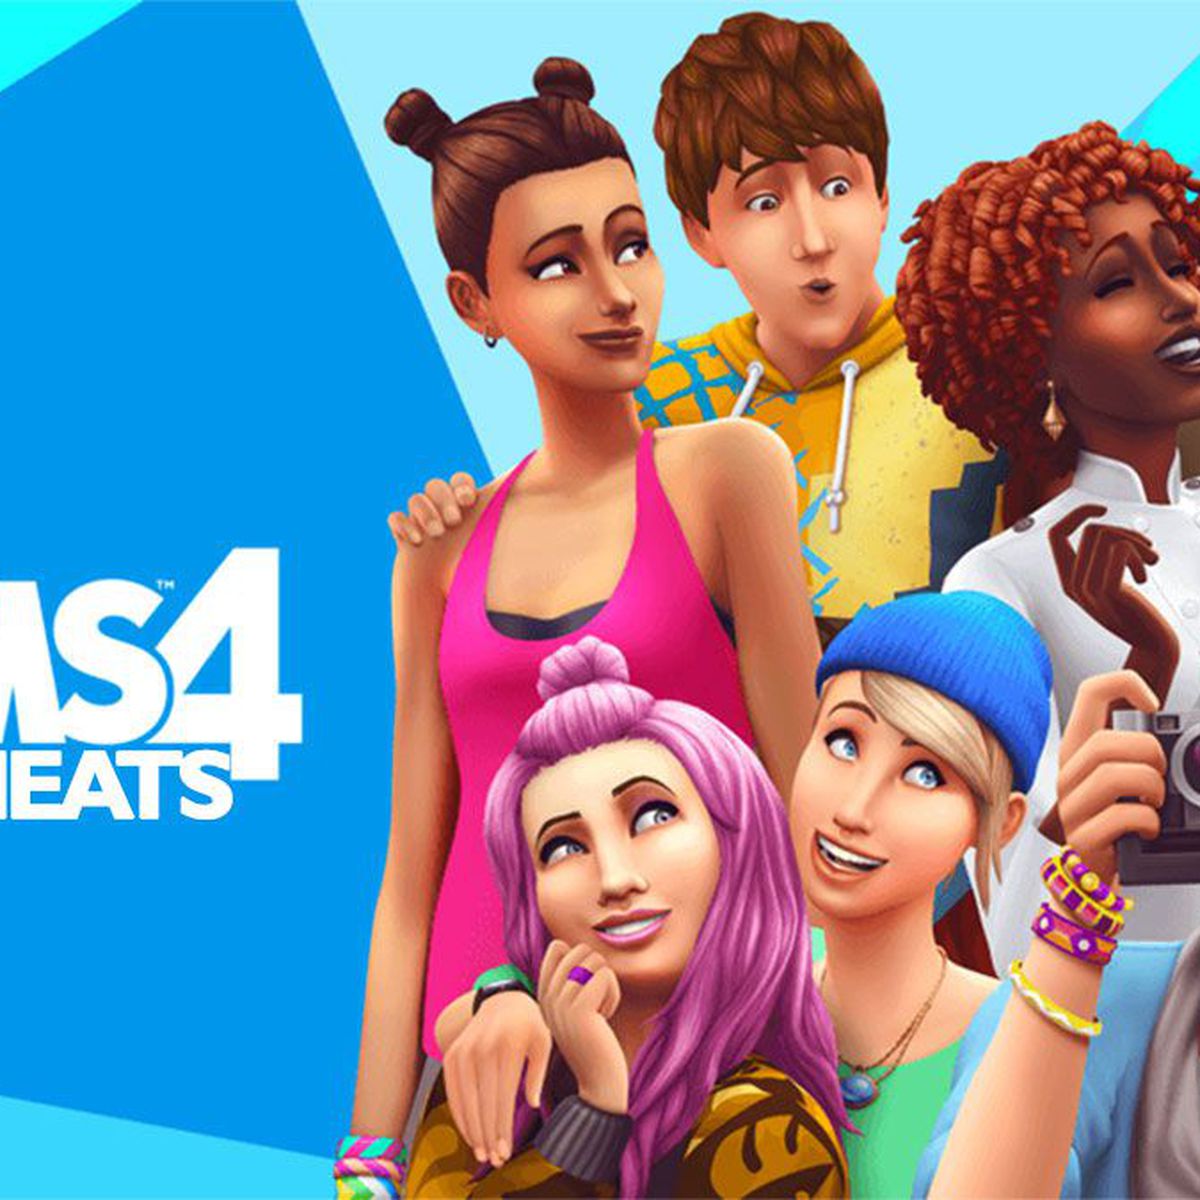 Here's How to Unlock 'The Sims 4' Cheats on Xbox